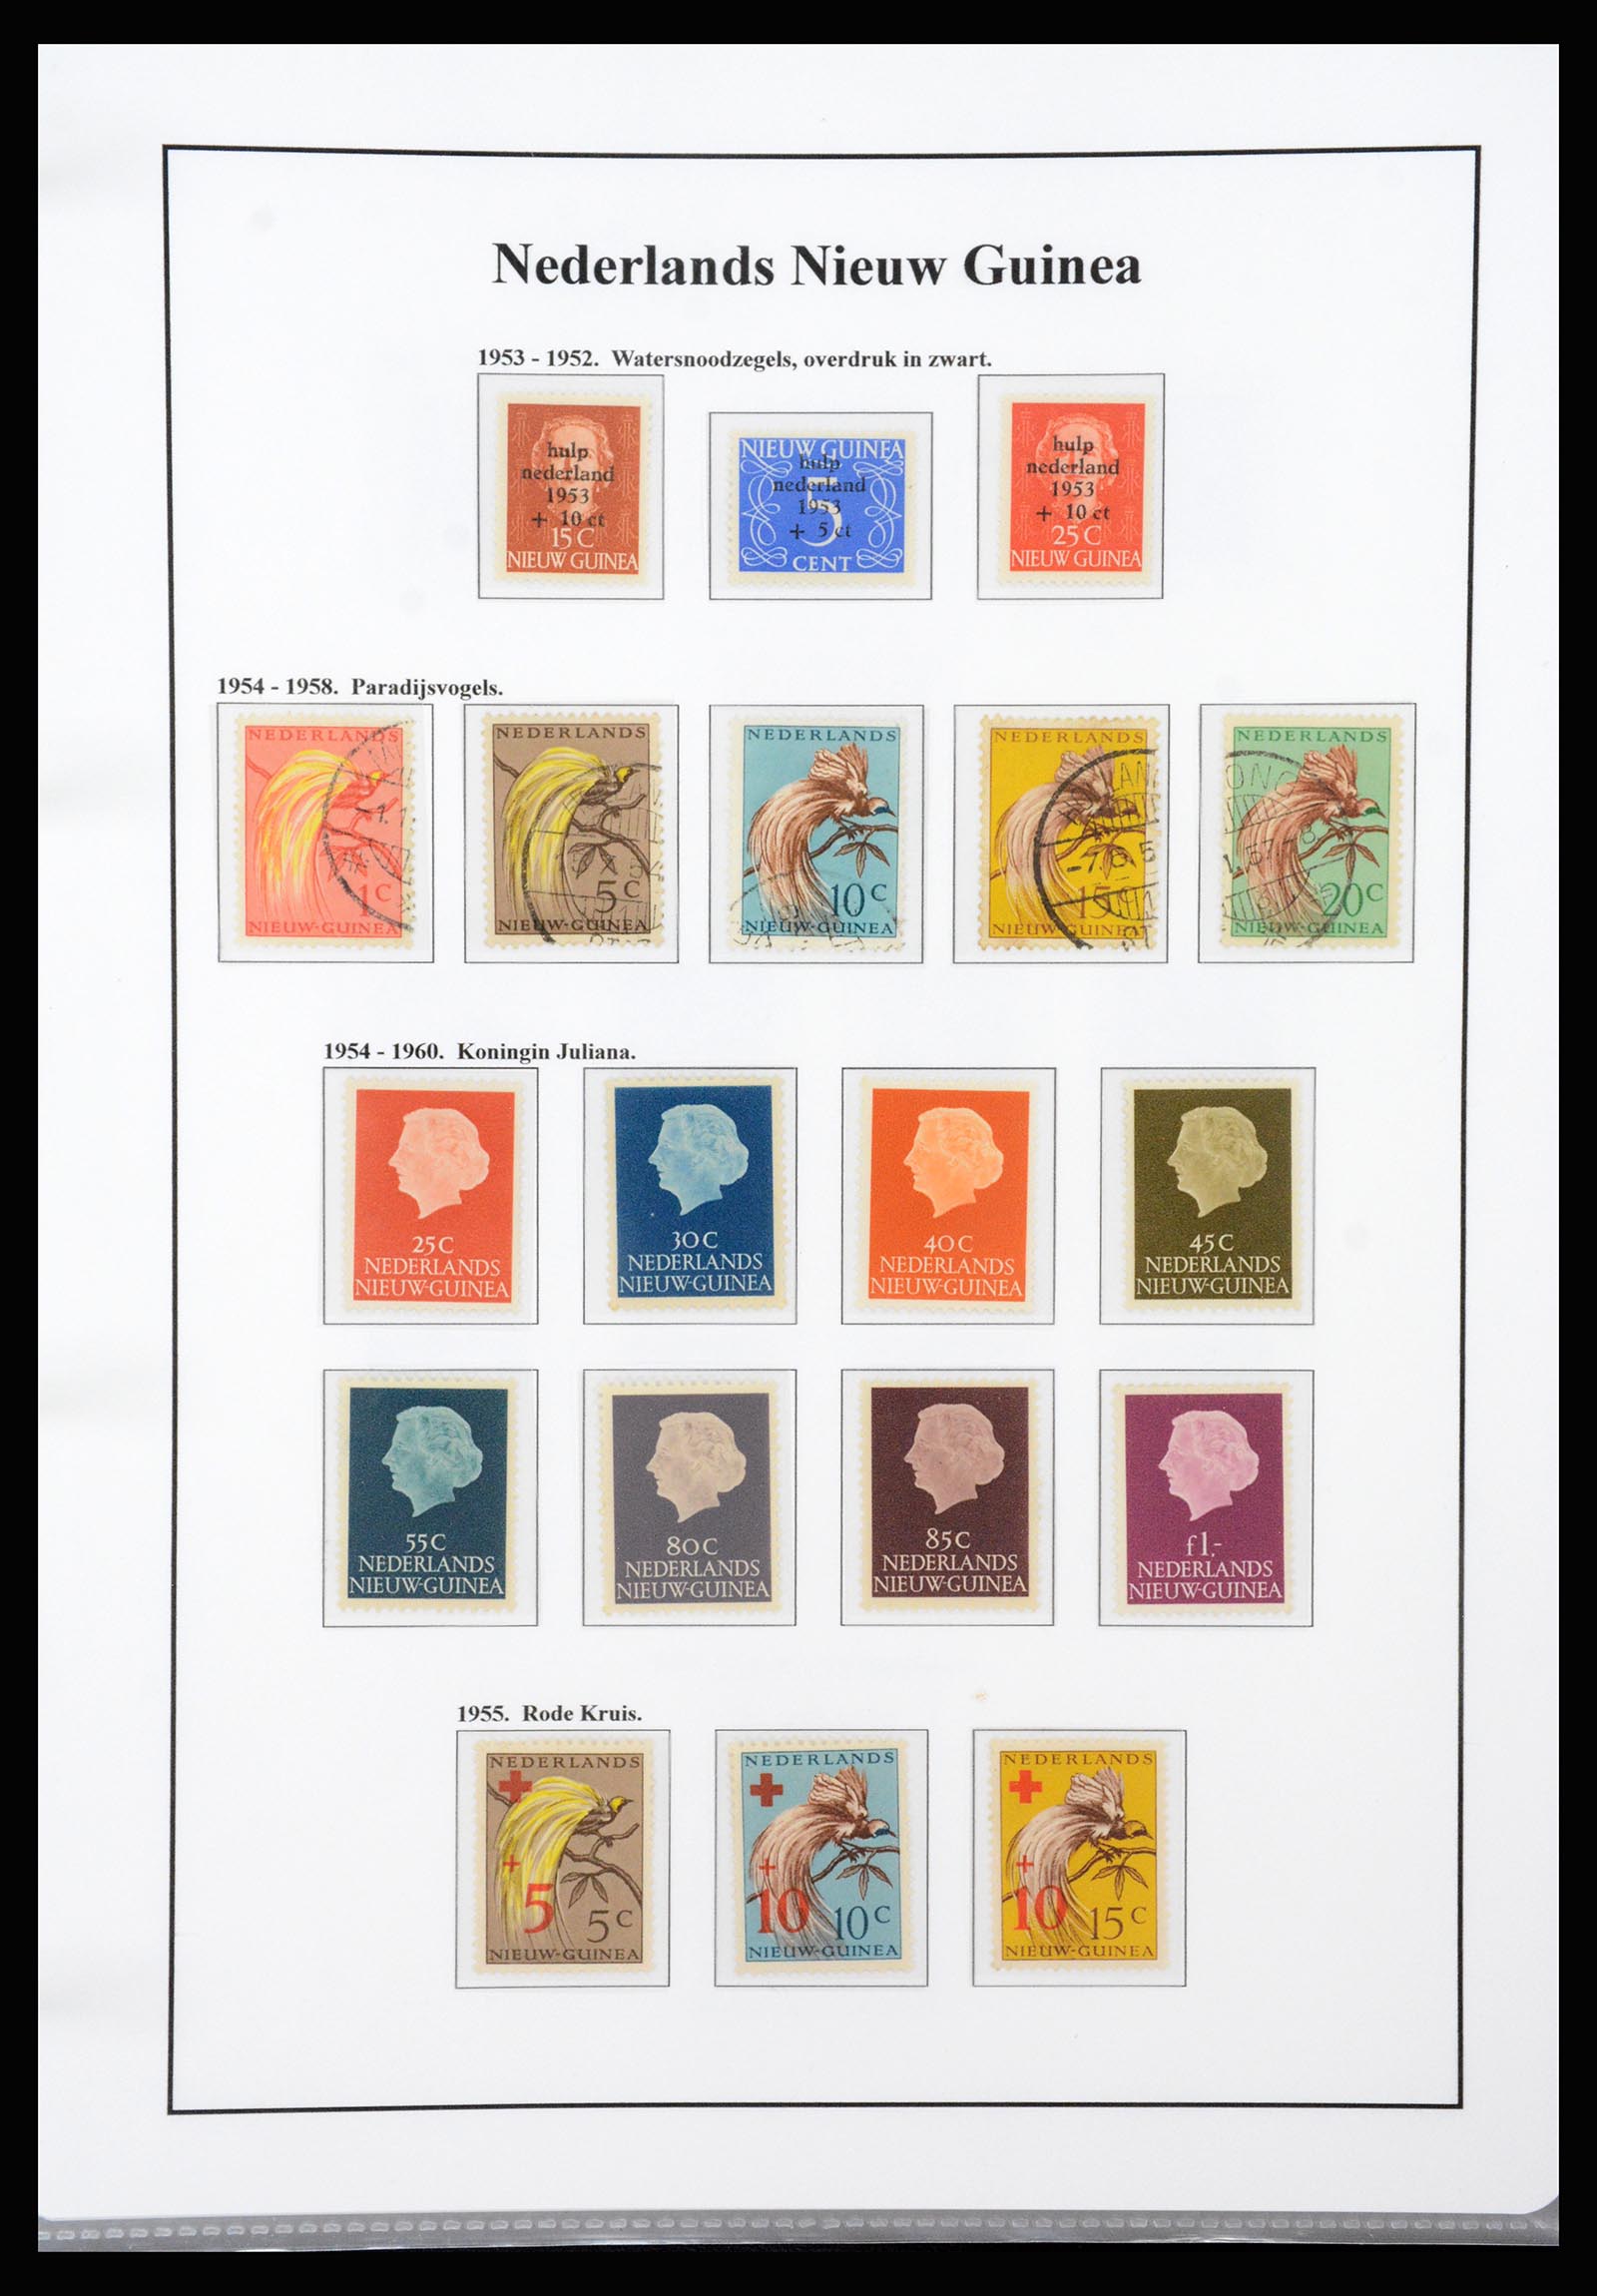 37247 040 - Stamp collection 37247 Dutch east Indies 1864-1949.